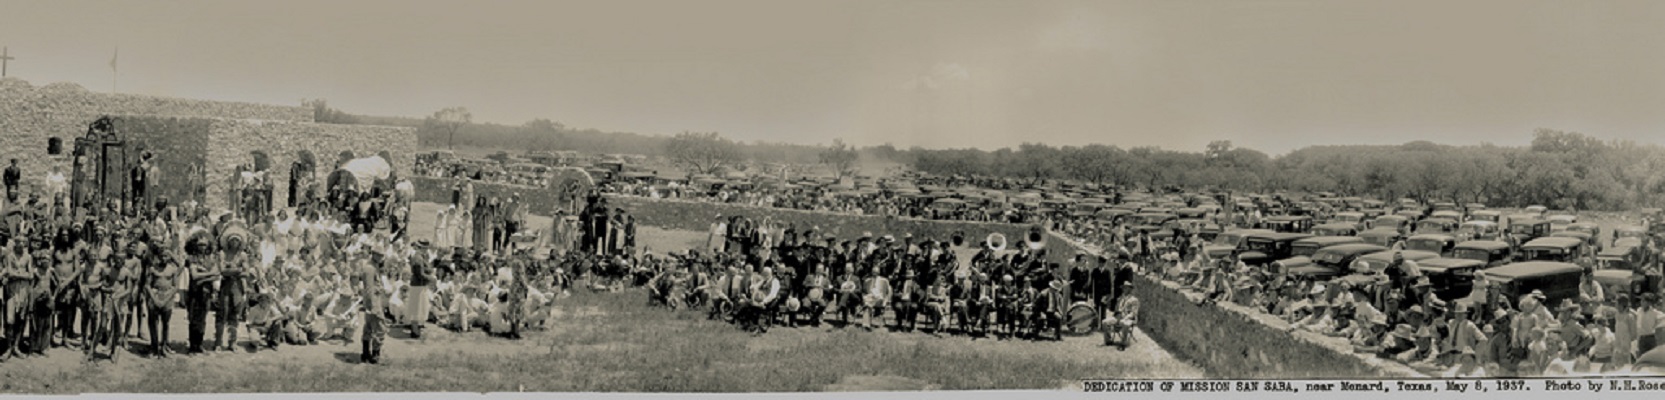 In 1937, the WPA rebuilt a portion of the Presidio de San Sabá historical site, but due to poor workmanship, it soon fell into ruins. This is a photograph of the people who came to the first dedication in May, 1937.